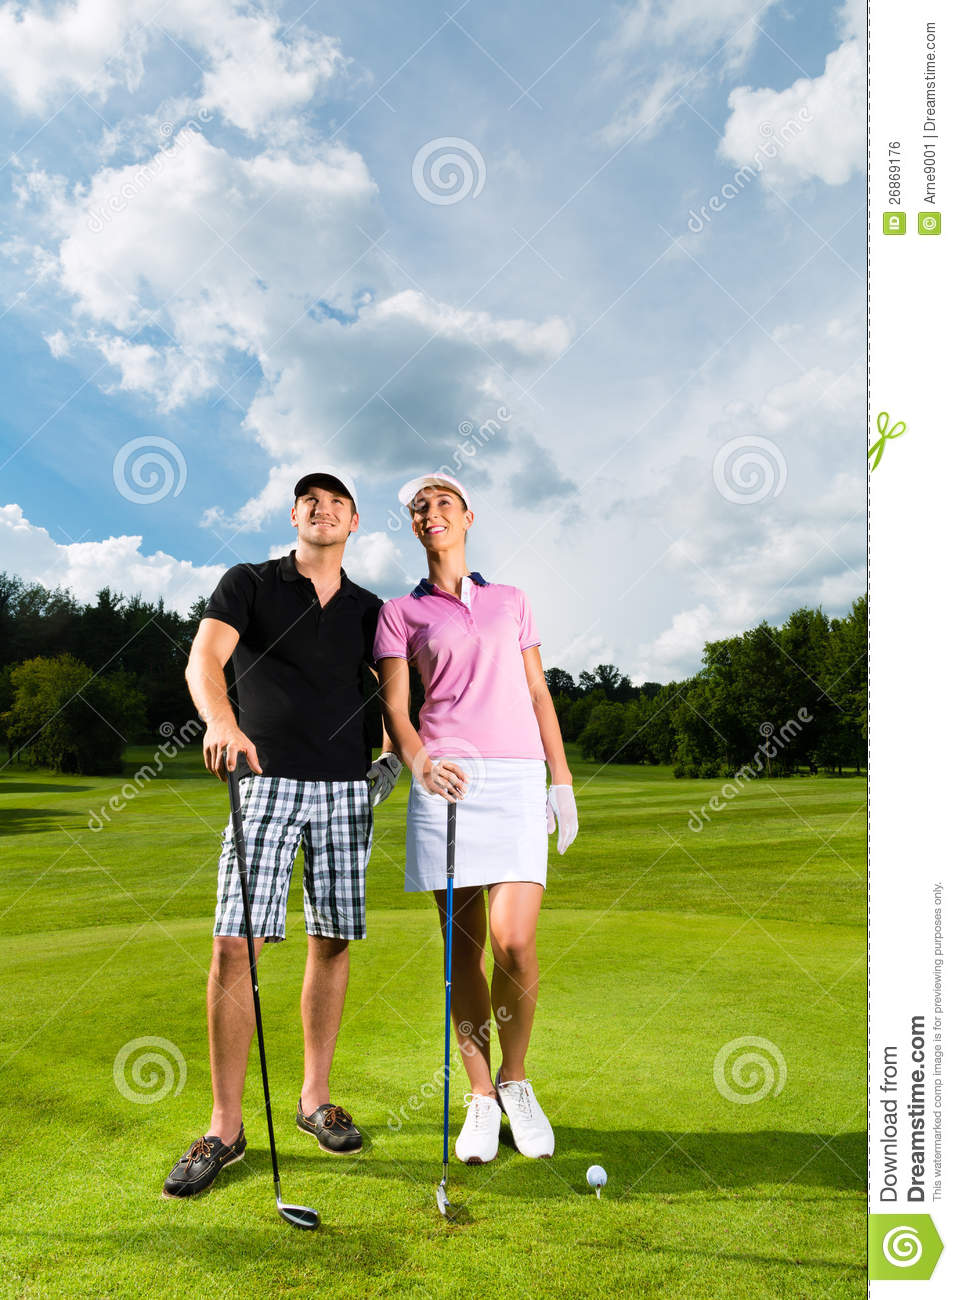 Young Sportive Couple Playing Golf On A Golf Course They Certainly Do